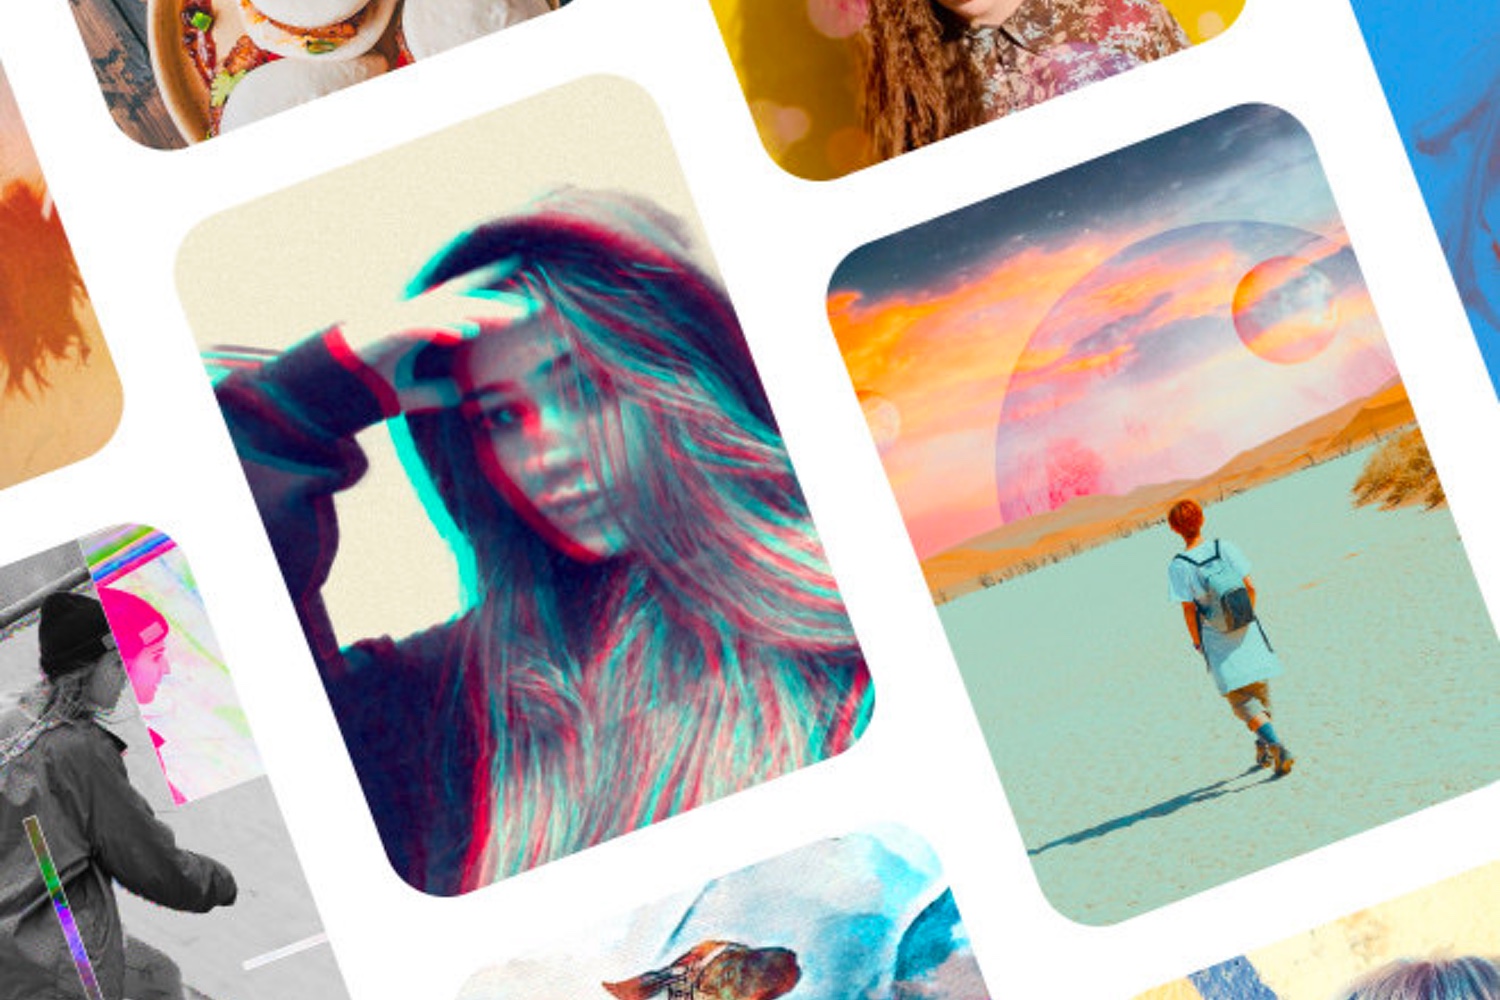 Instagram has a new ally, Photoshop Camera